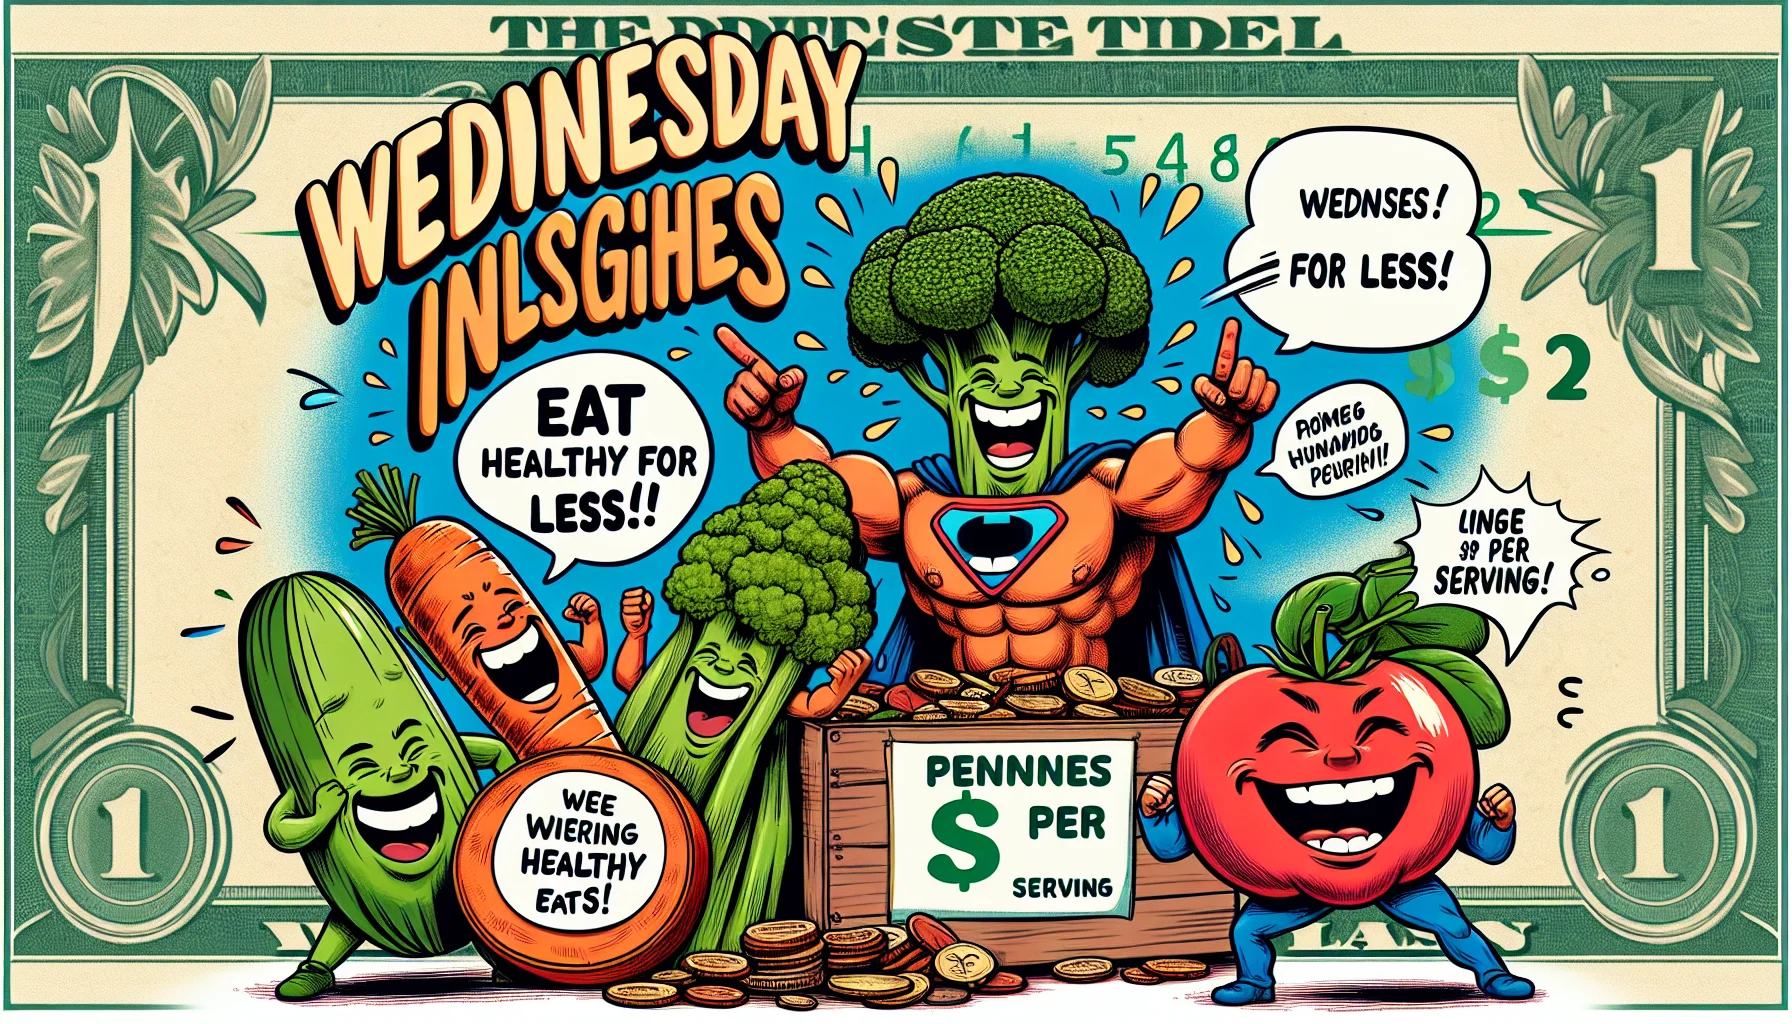 Picture a humorous scene for 'Wednesday Wellness Insights' promoting affordable healthy eating. There's a pile of oversized vegetables: a grinning carrot, a laughing broccoli, and a giggling tomato, all with cartoonish faces. They point towards a dollar bill, indicating the affordability. Nearby, a muscular cartoon spinach leaf wearing a superhero cape flaunts a price tag showing 'Pennies per Serving.' There are speech bubbles generating laughter around the veggies. In the upper left corner, text in playful, bold font says: 'Wednesday Wellness Insights - Eat Healthy for Less!'